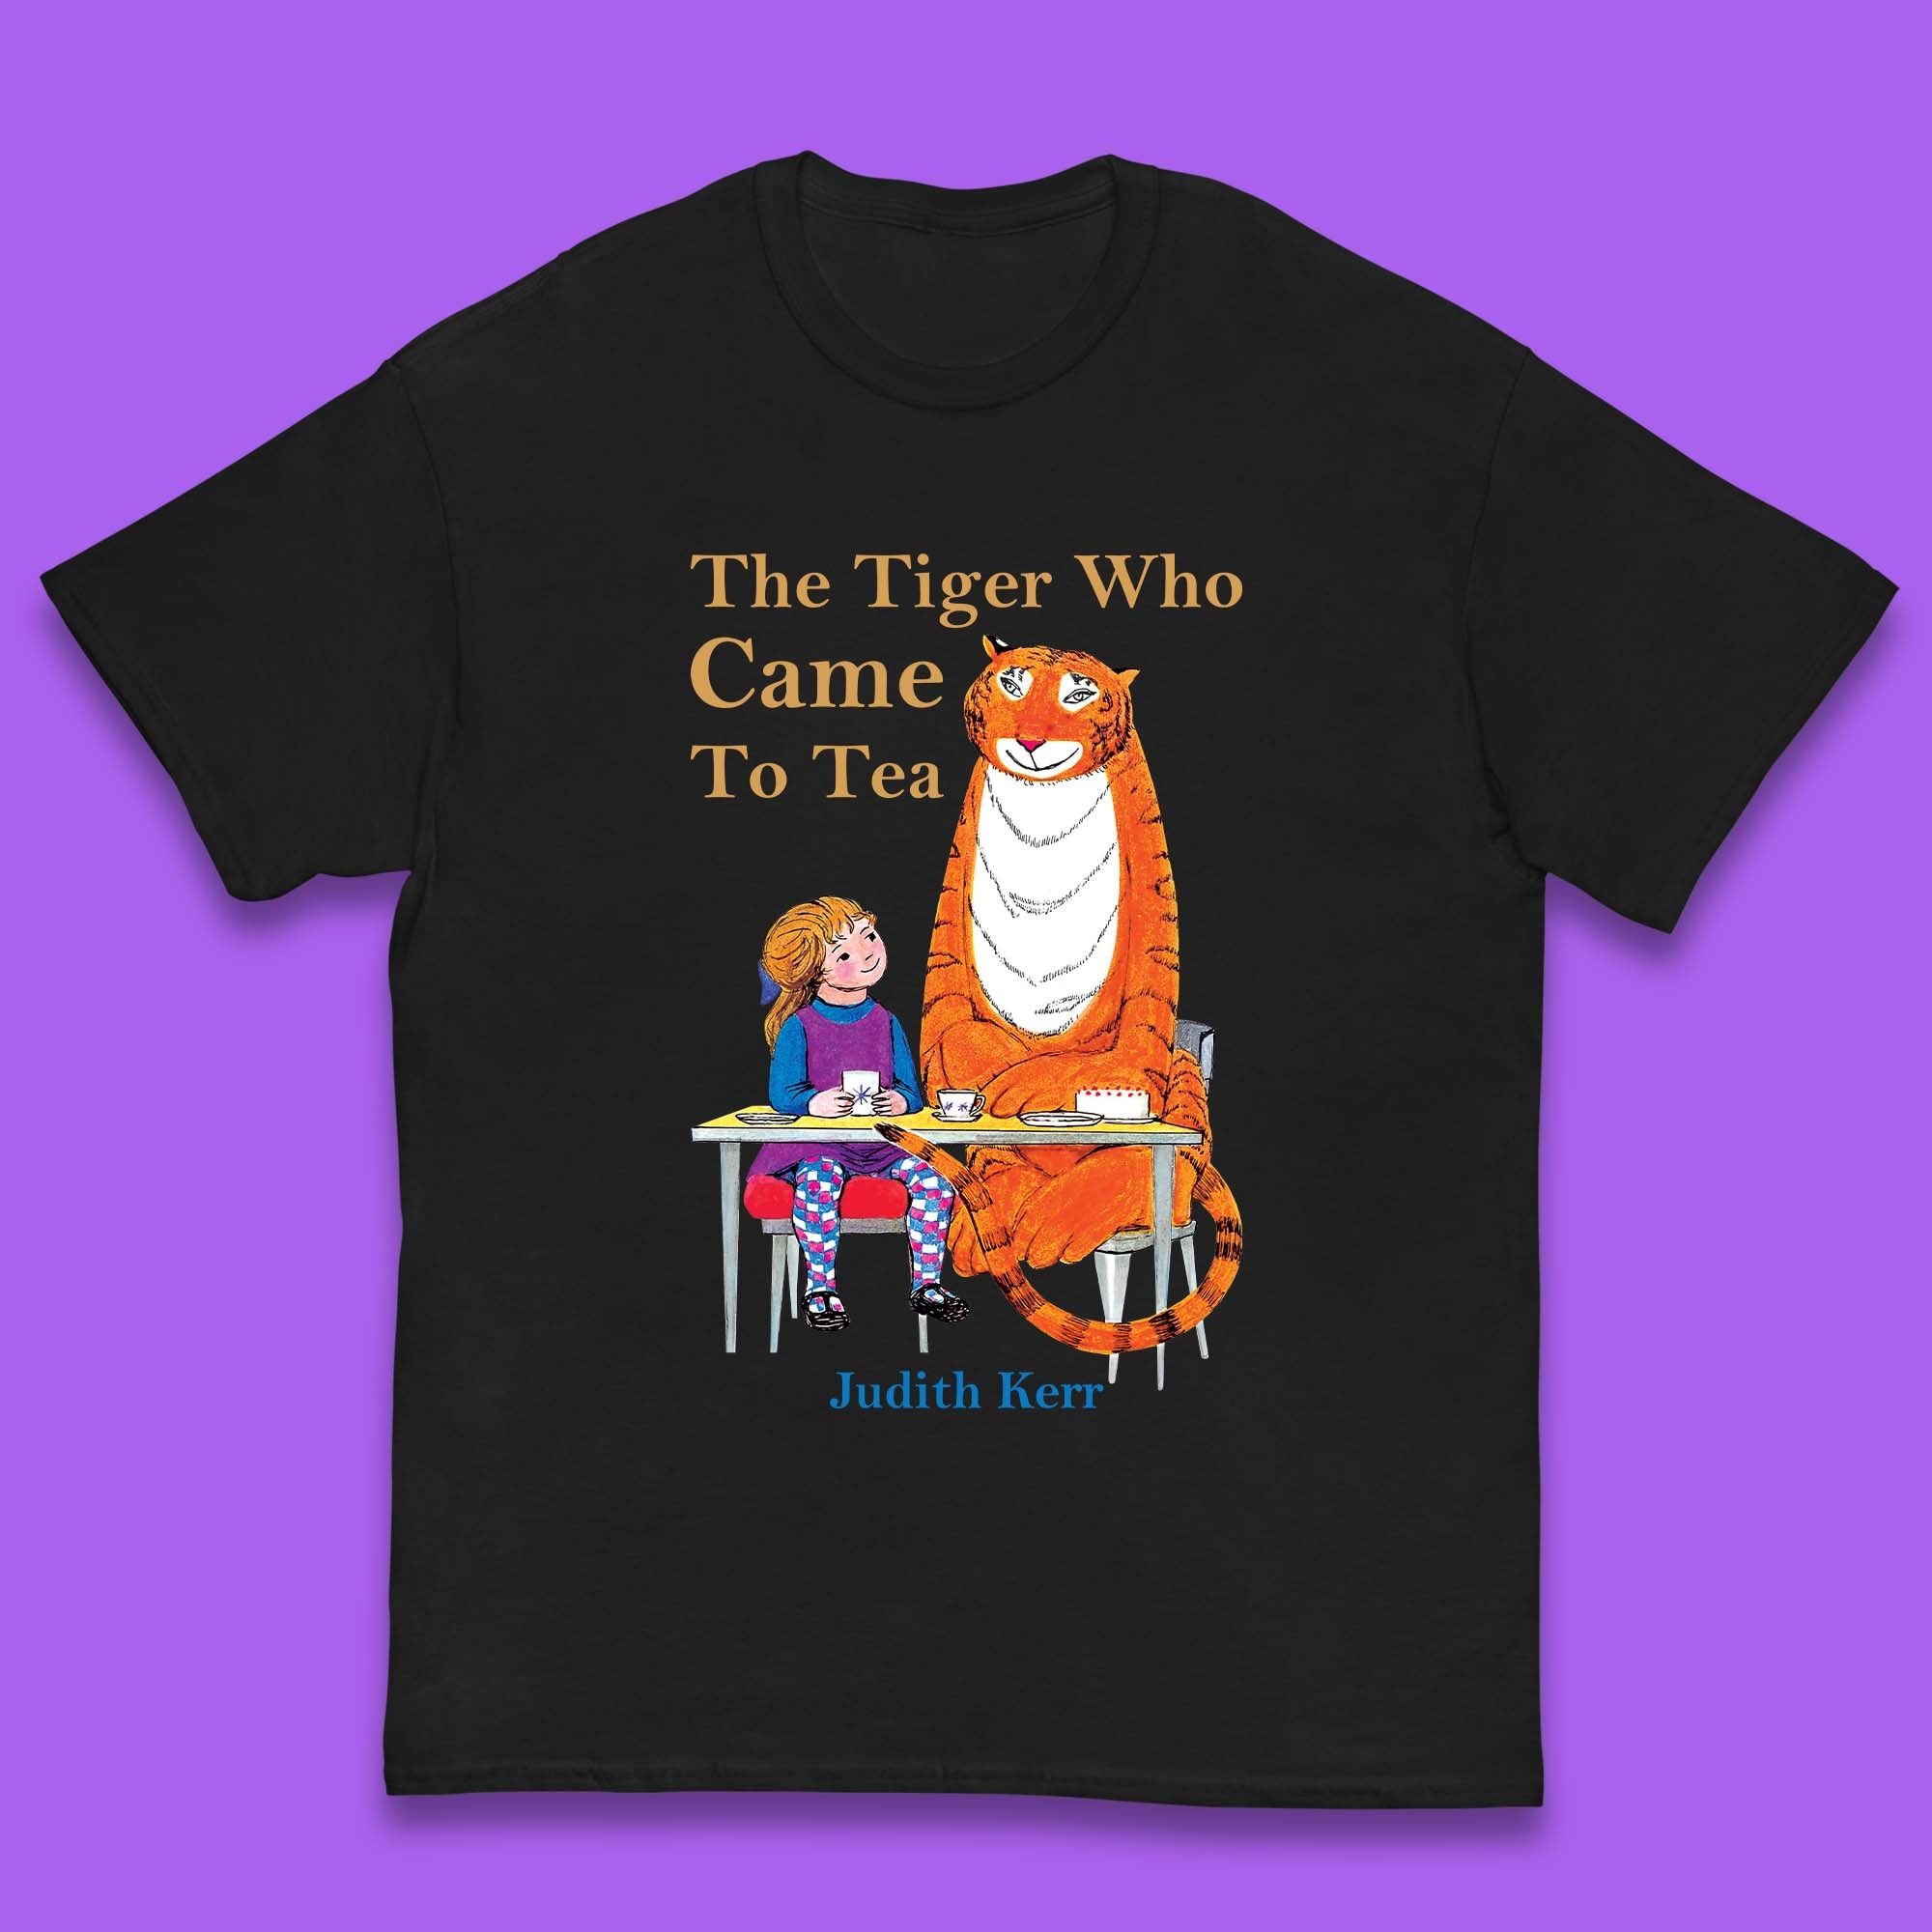 The Tiger Who Came To Tea Kids T-Shirt